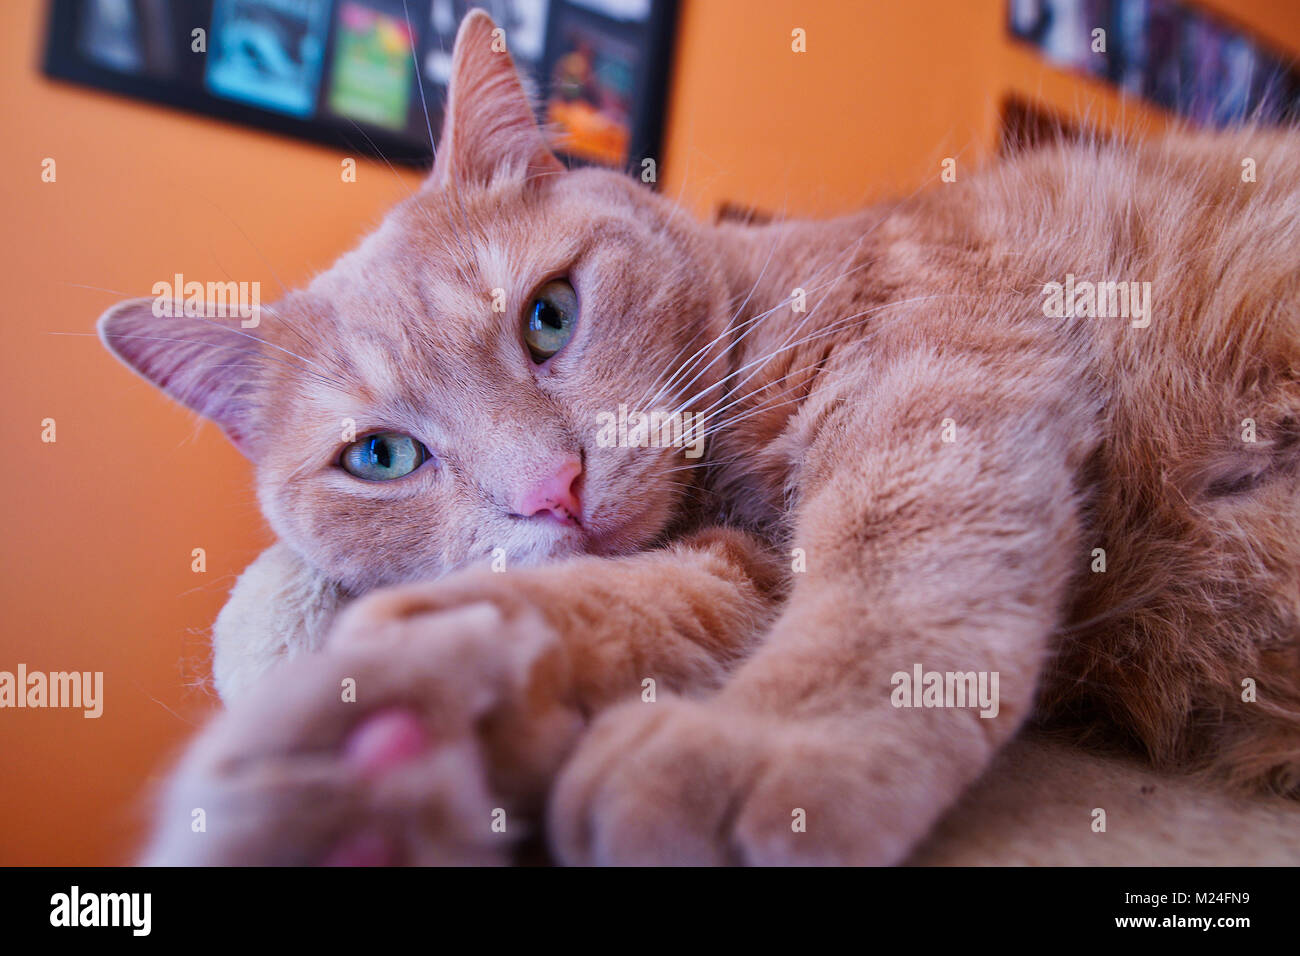 Montreal, Canada, Febuary 04,2018.Close-up of a tabby cat on perch.Credit:Mario Beauregard/Alamy Live News Stock Photo